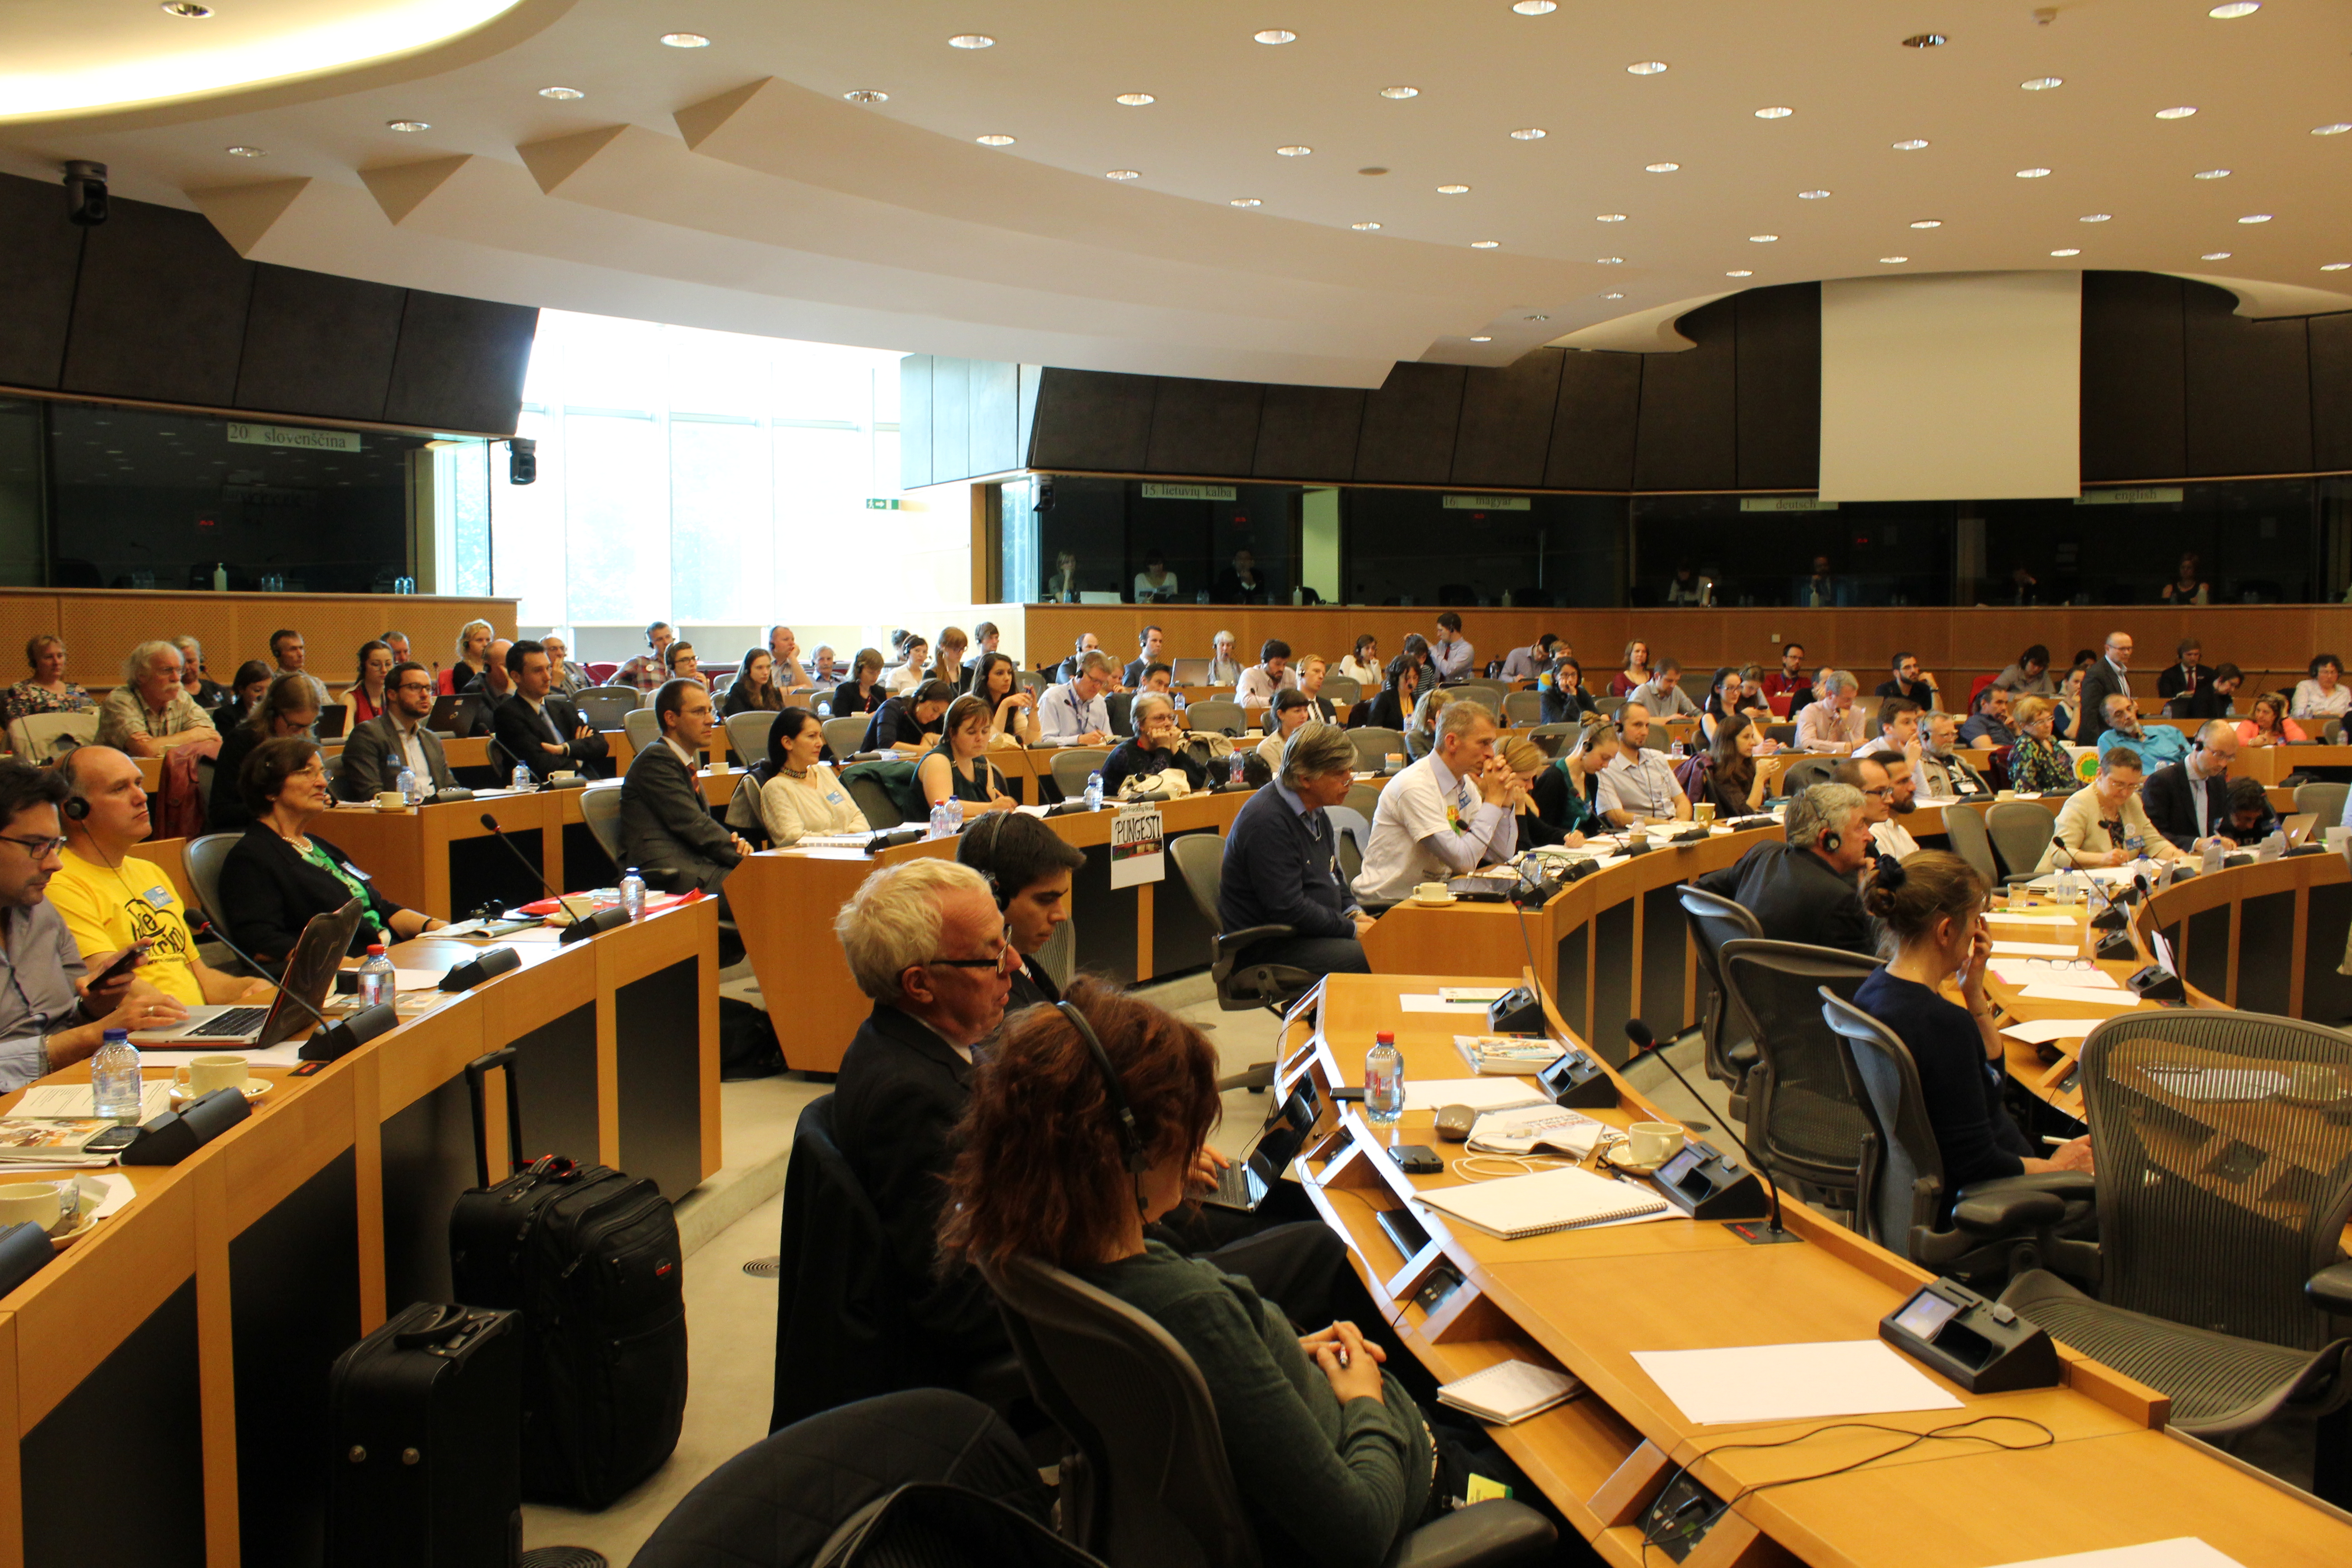 Europe_Not_For_Shale_Conference